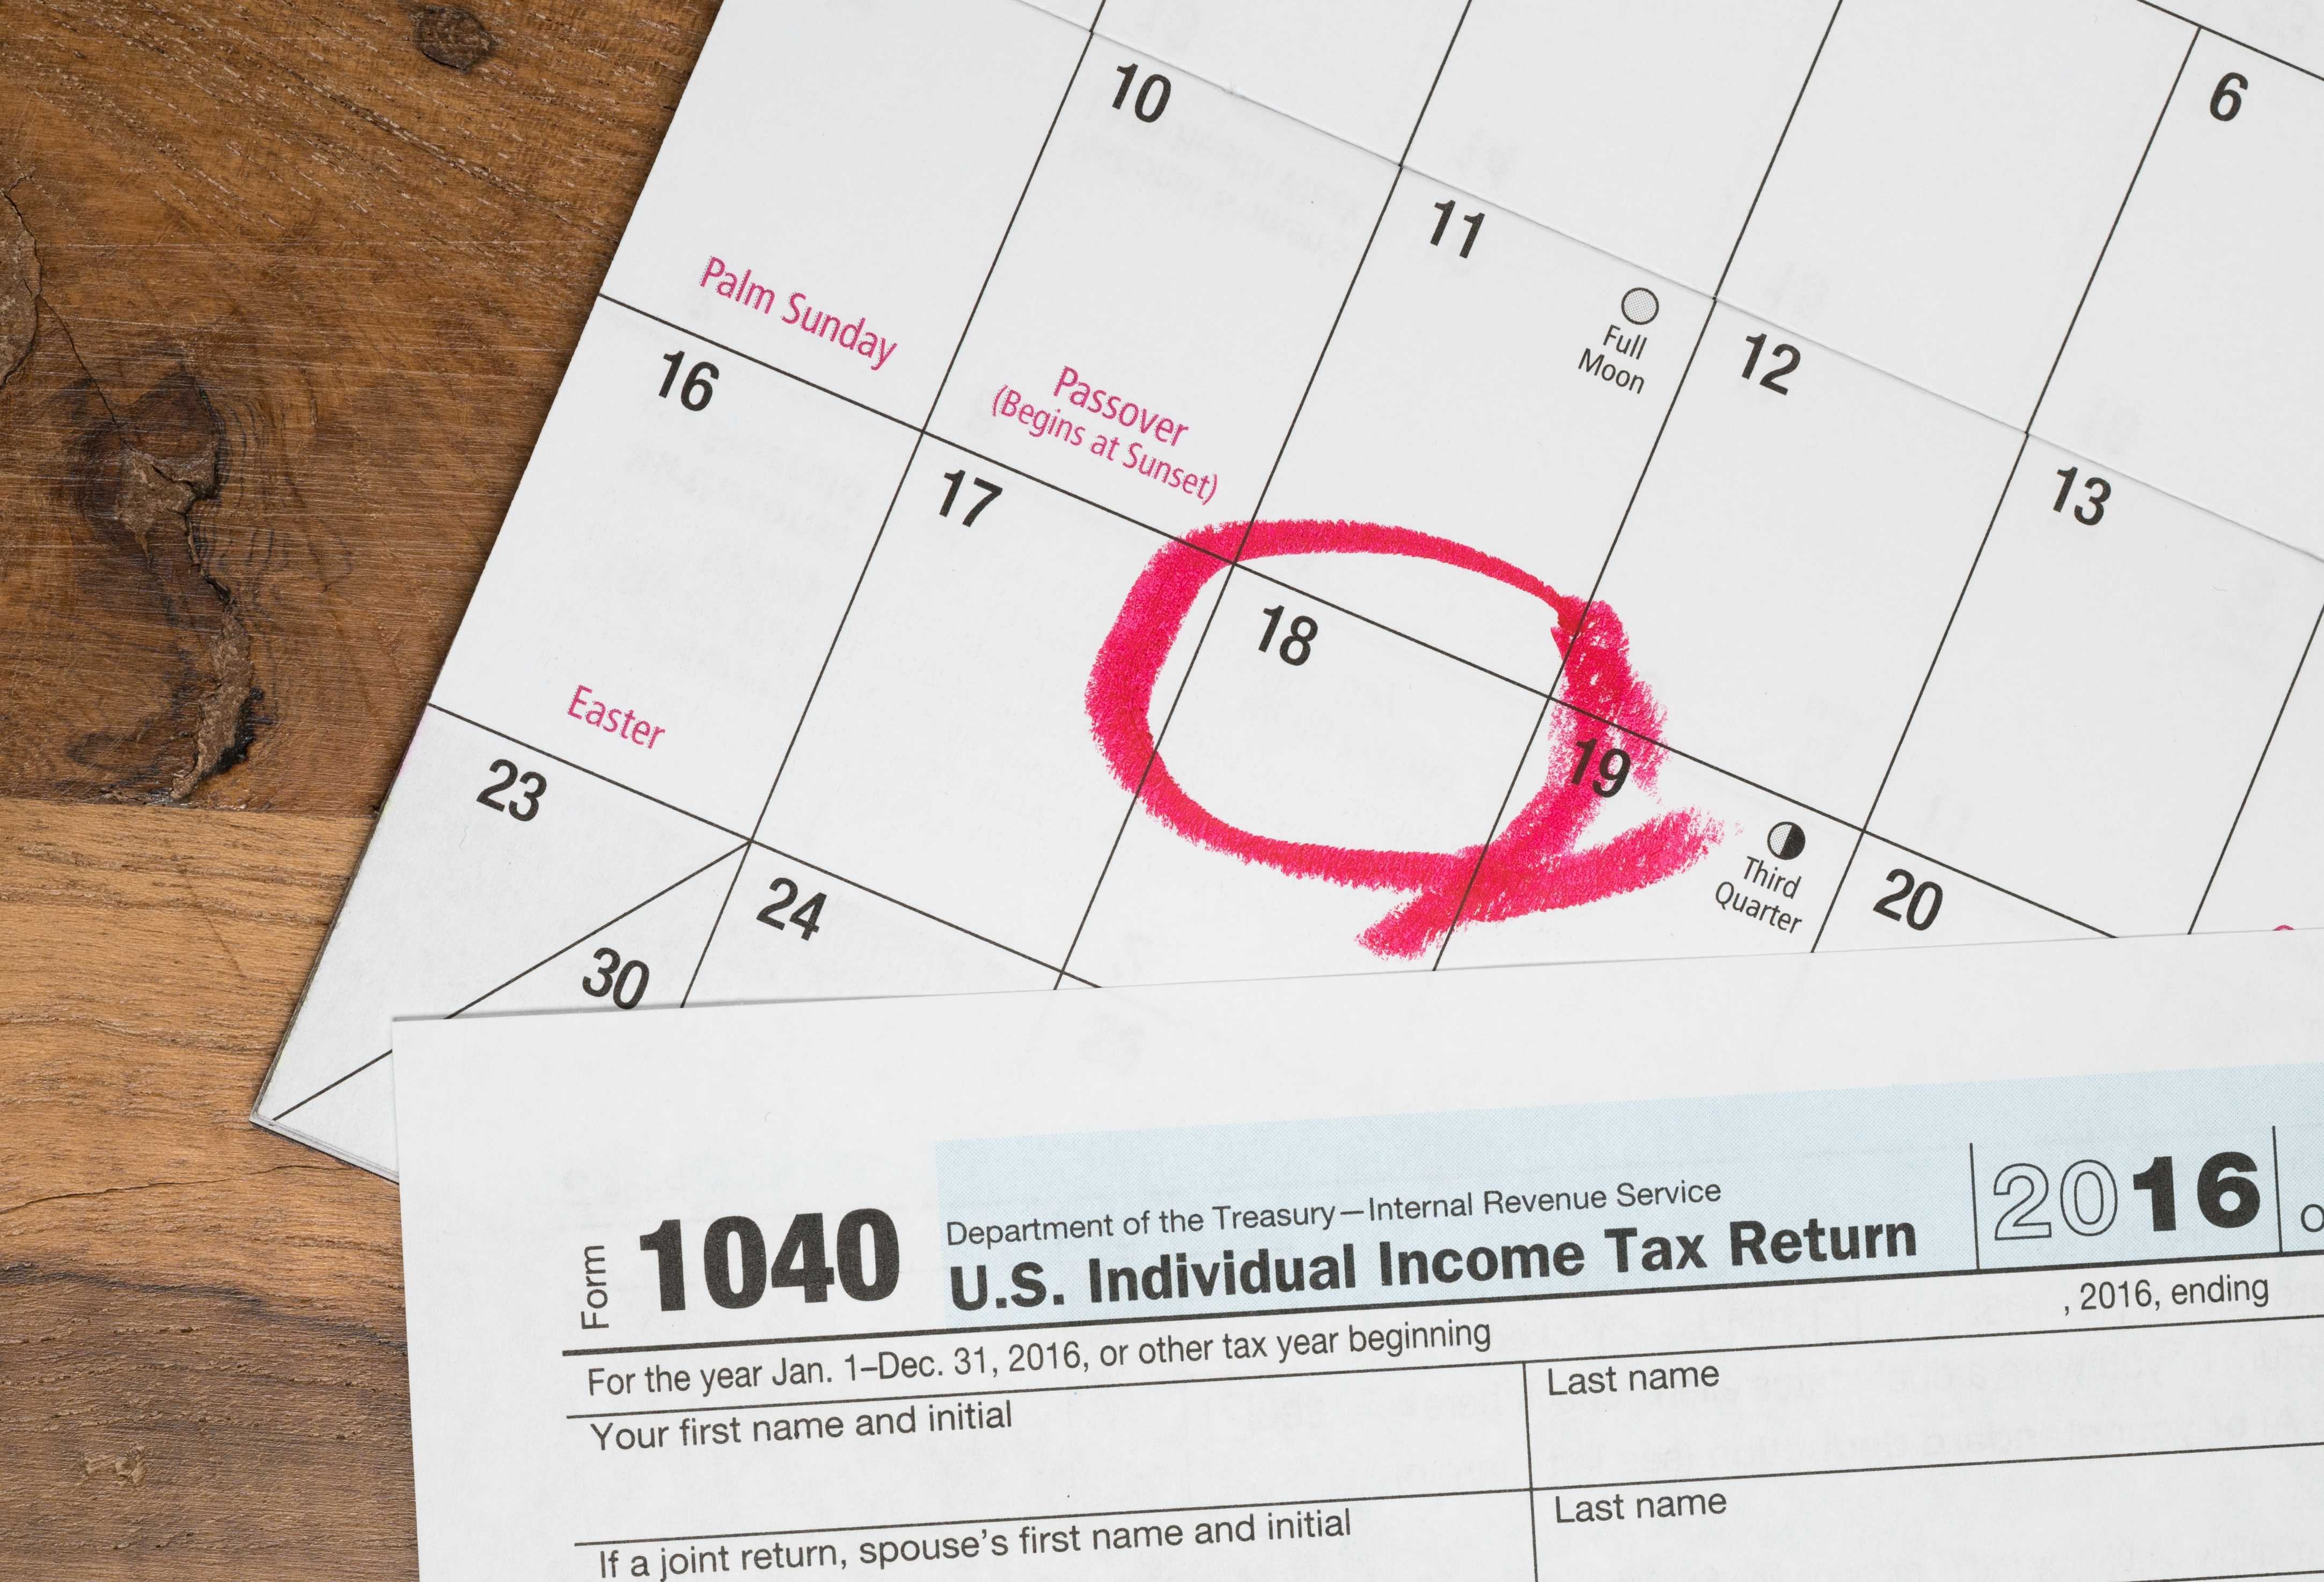 I missed the deadline to file my tax return. Now what? Wagner Tax Law